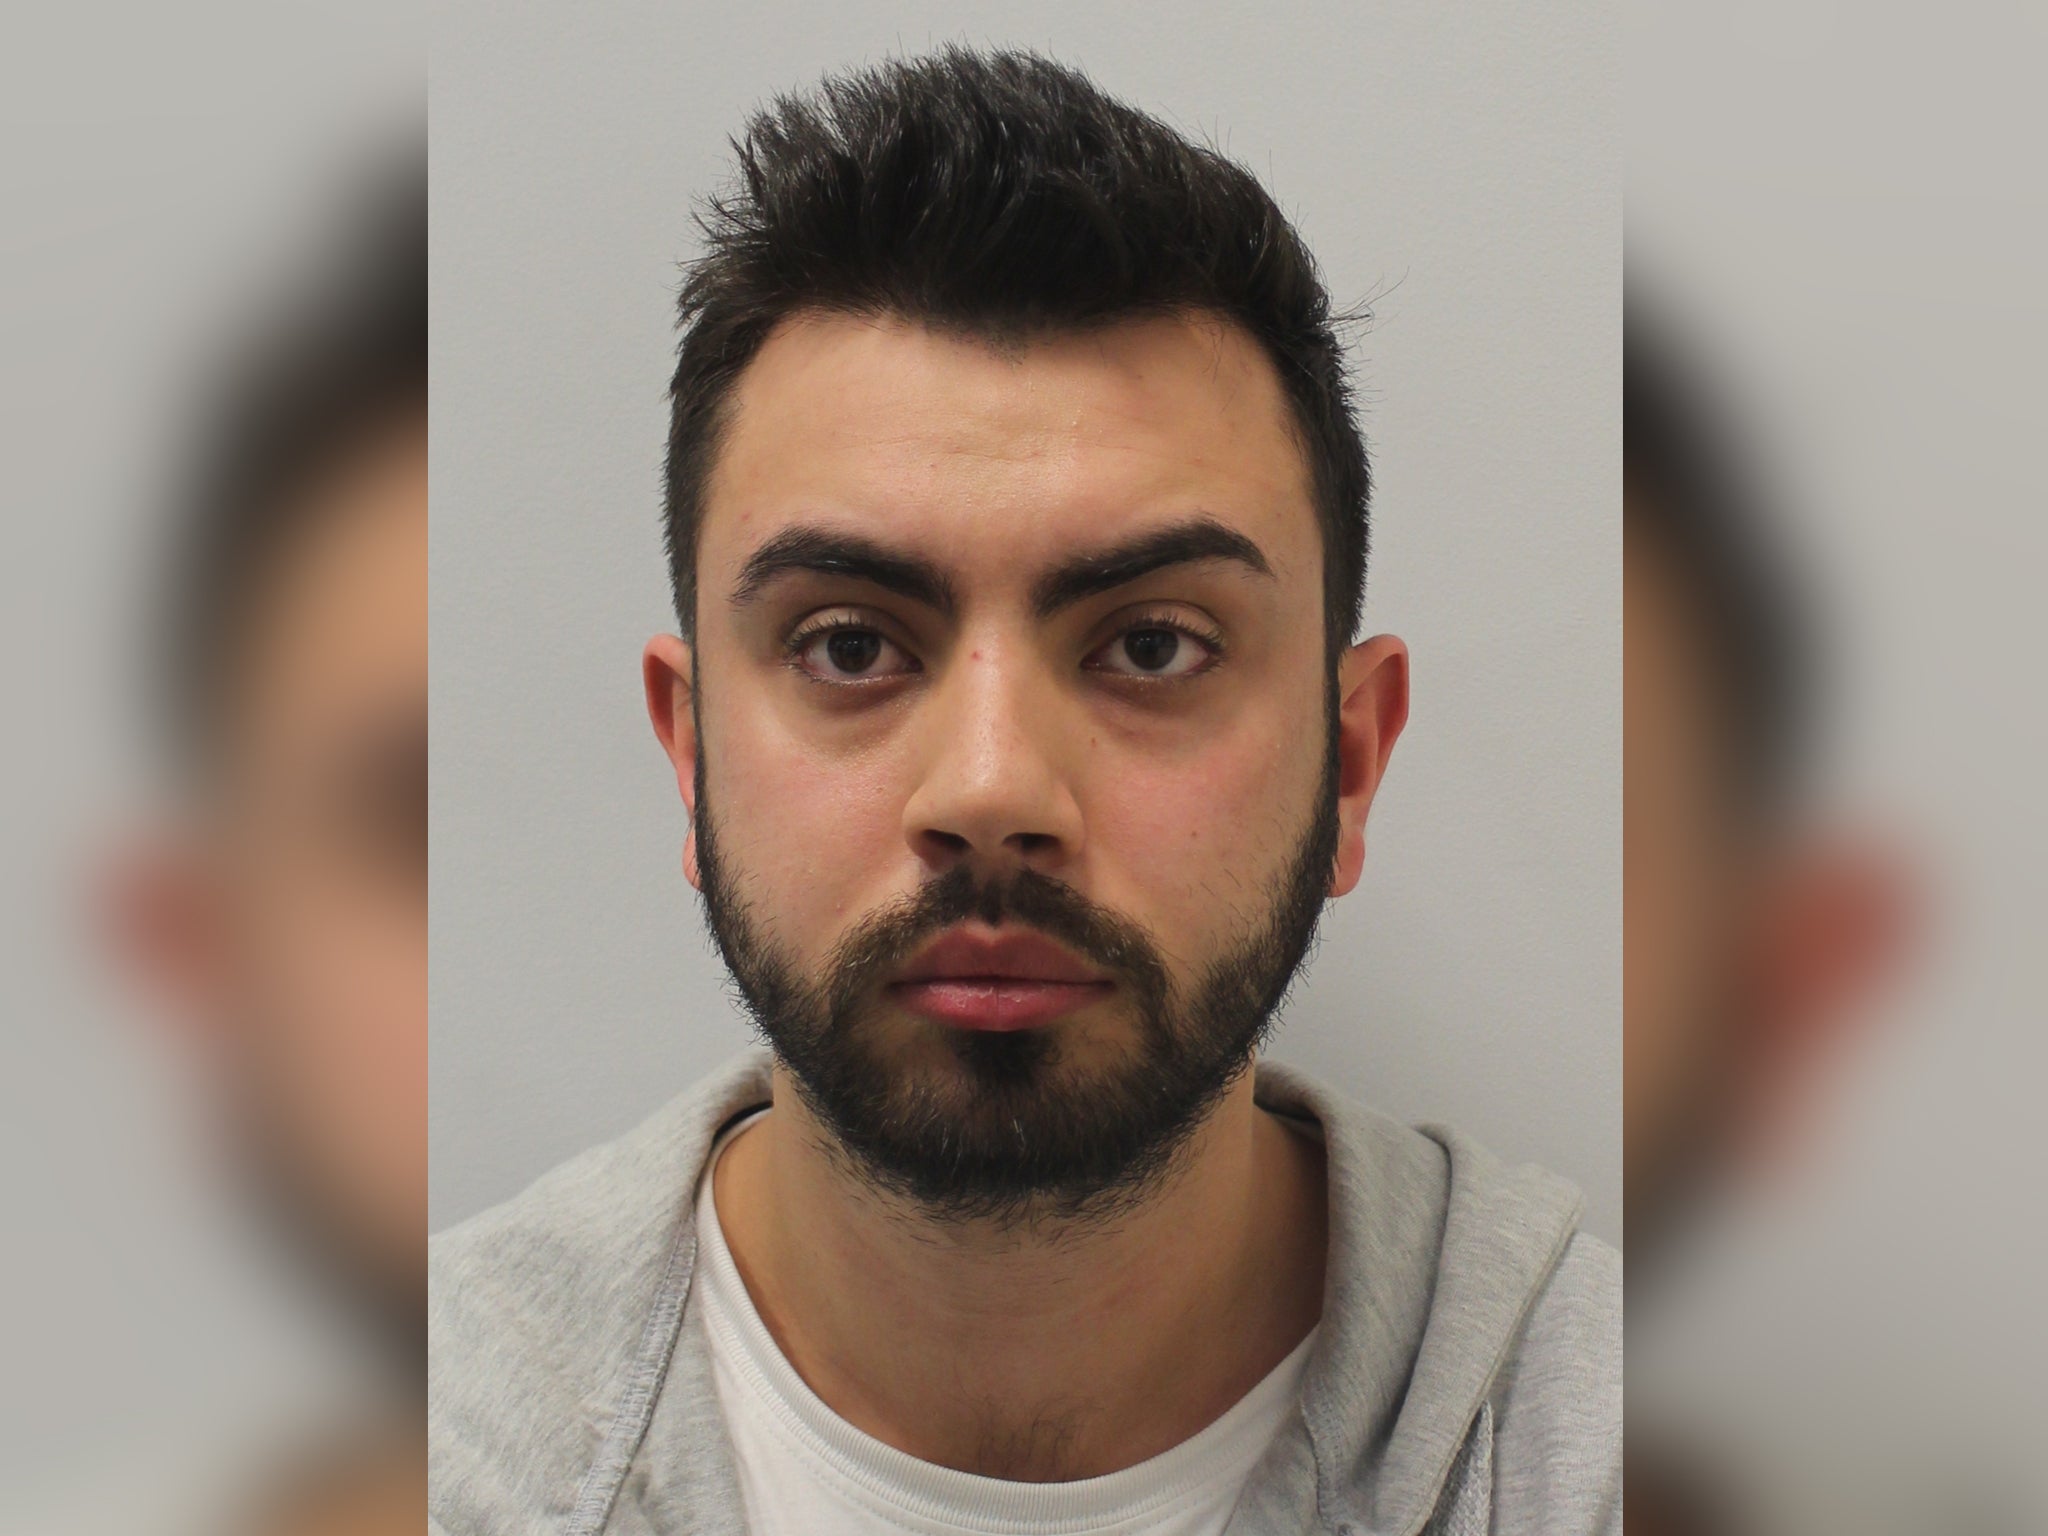 Bradley Clifford, 24, of Rendlesham Road in Enfield, north London, has been found guilty of murder